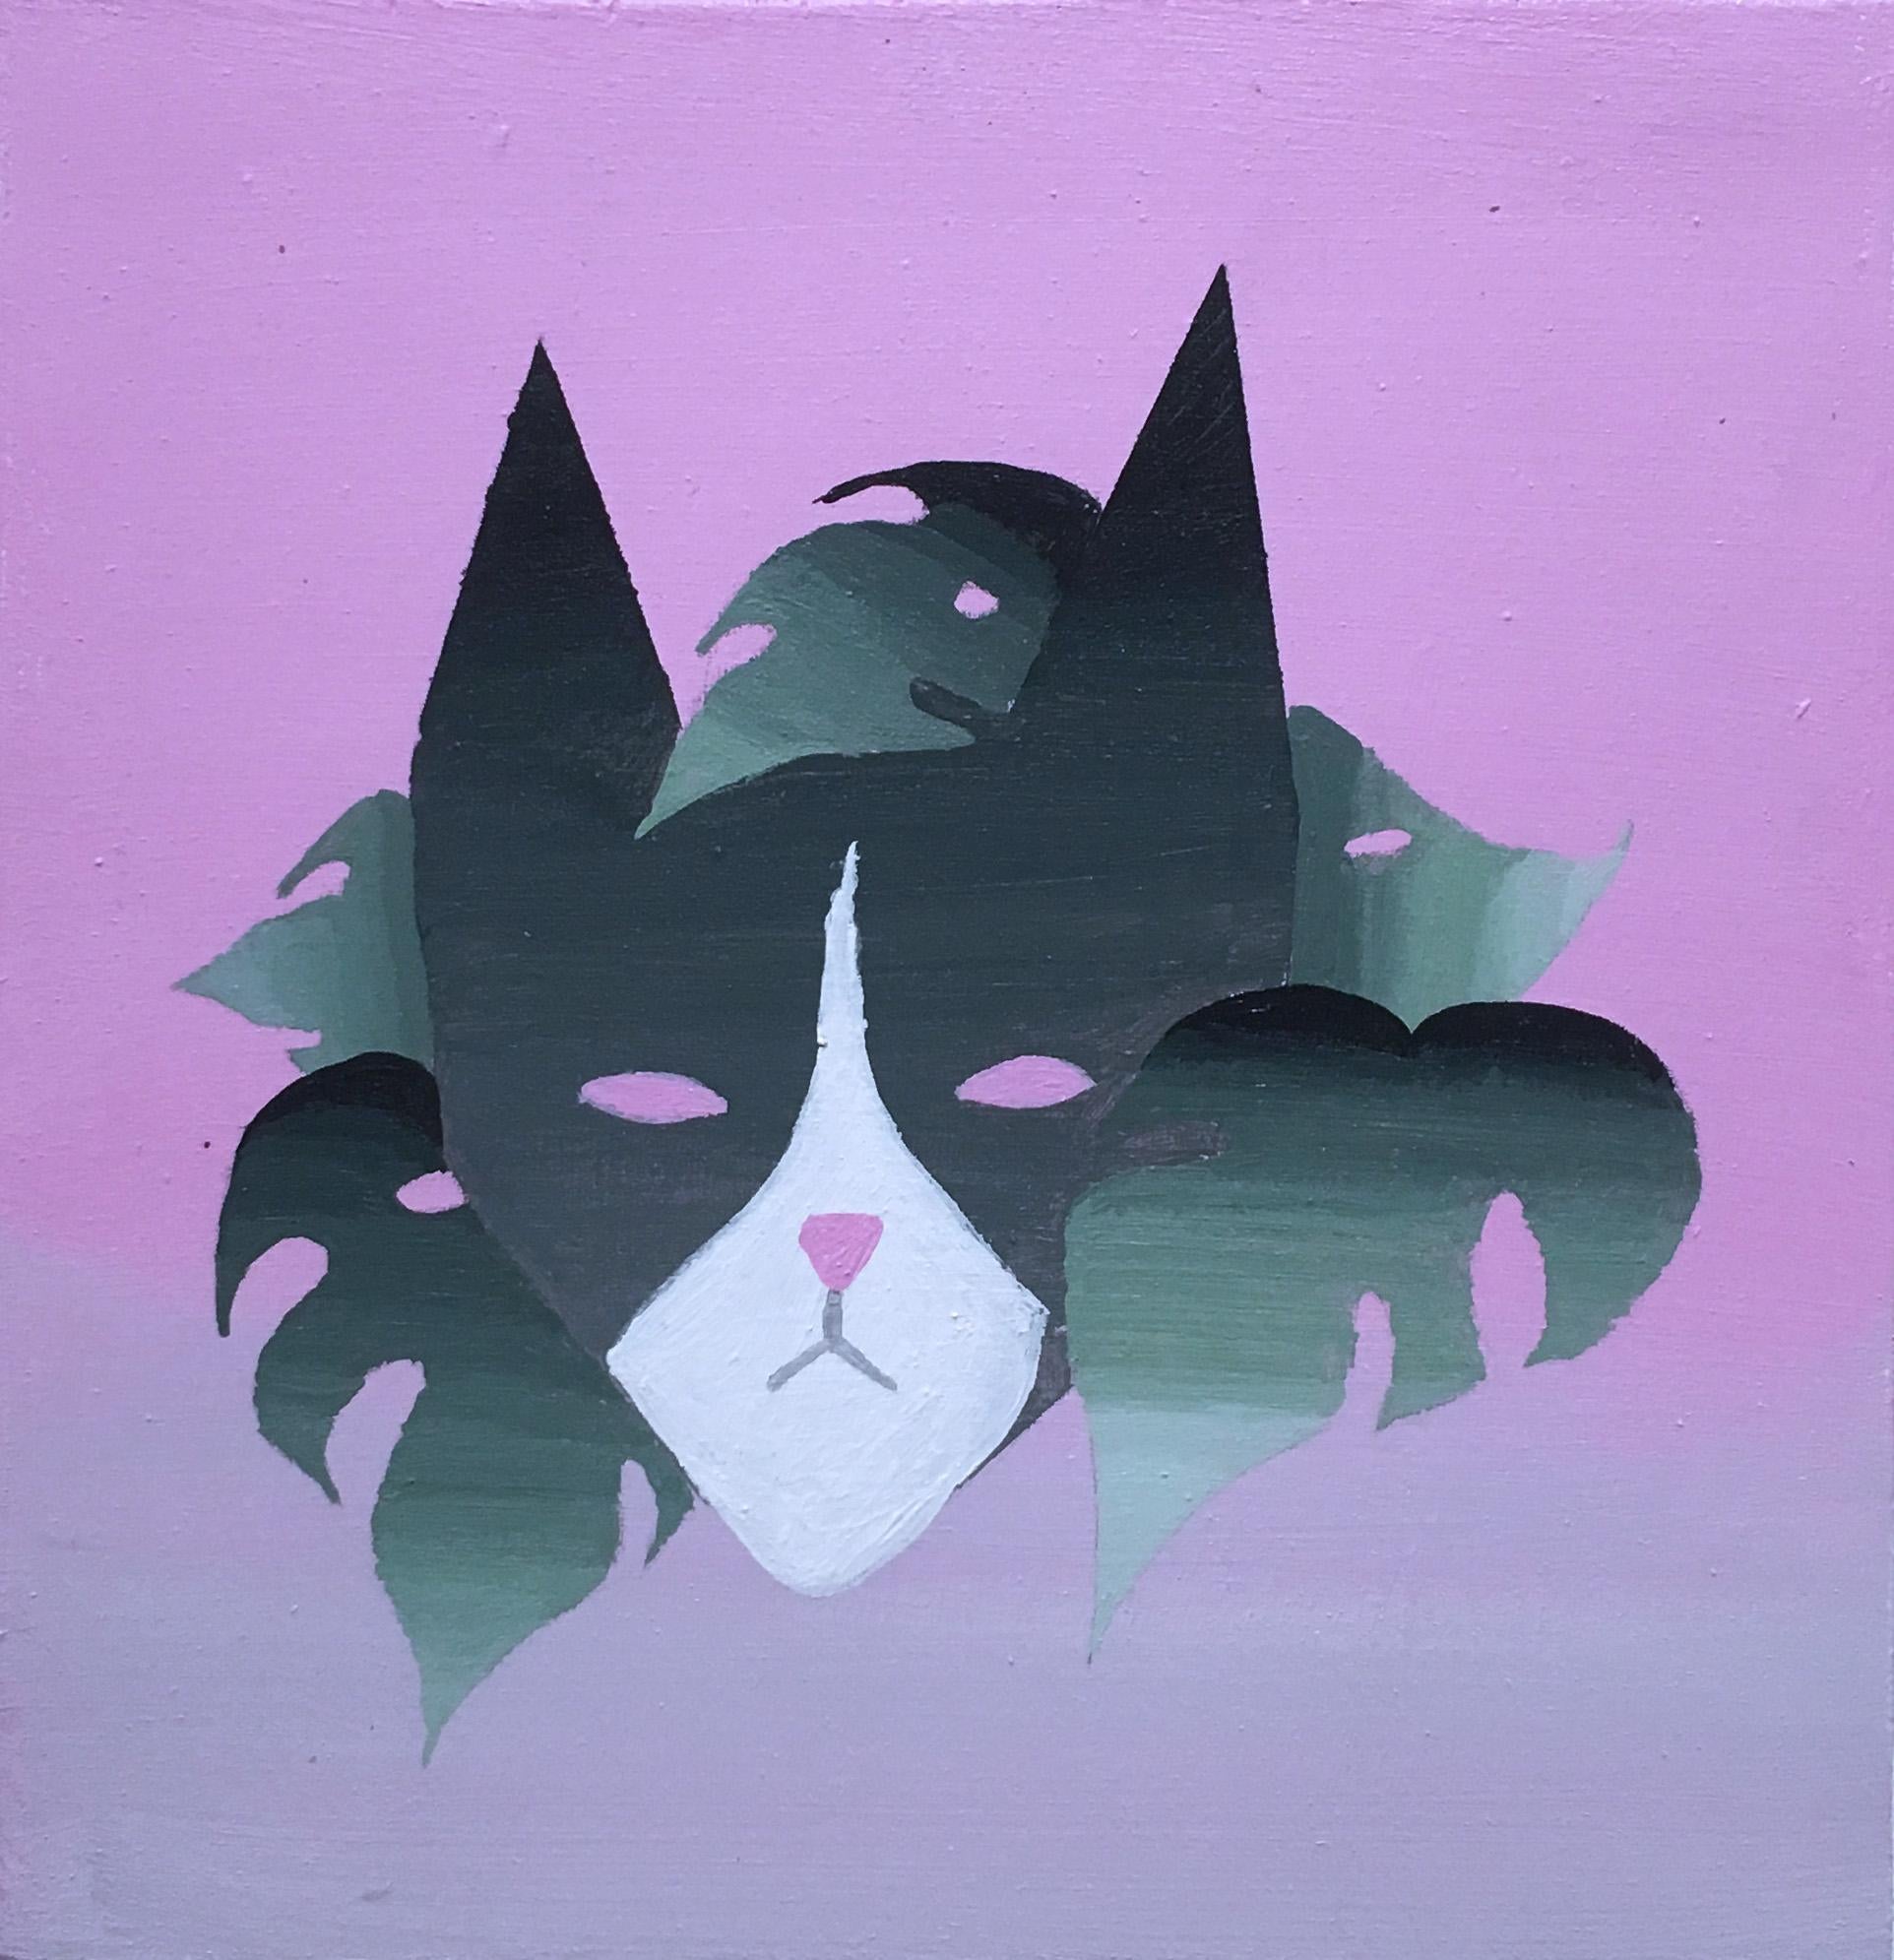 "Is Cat Enough" by Keith Garcia
2021
Acrylic on wood panel
Monstera plant with cat, figurative abstraction, geometric, small or miniature painting
Pastel palette: green, black, white, and pink, gray

Hand signed by artist
COA included
Framing